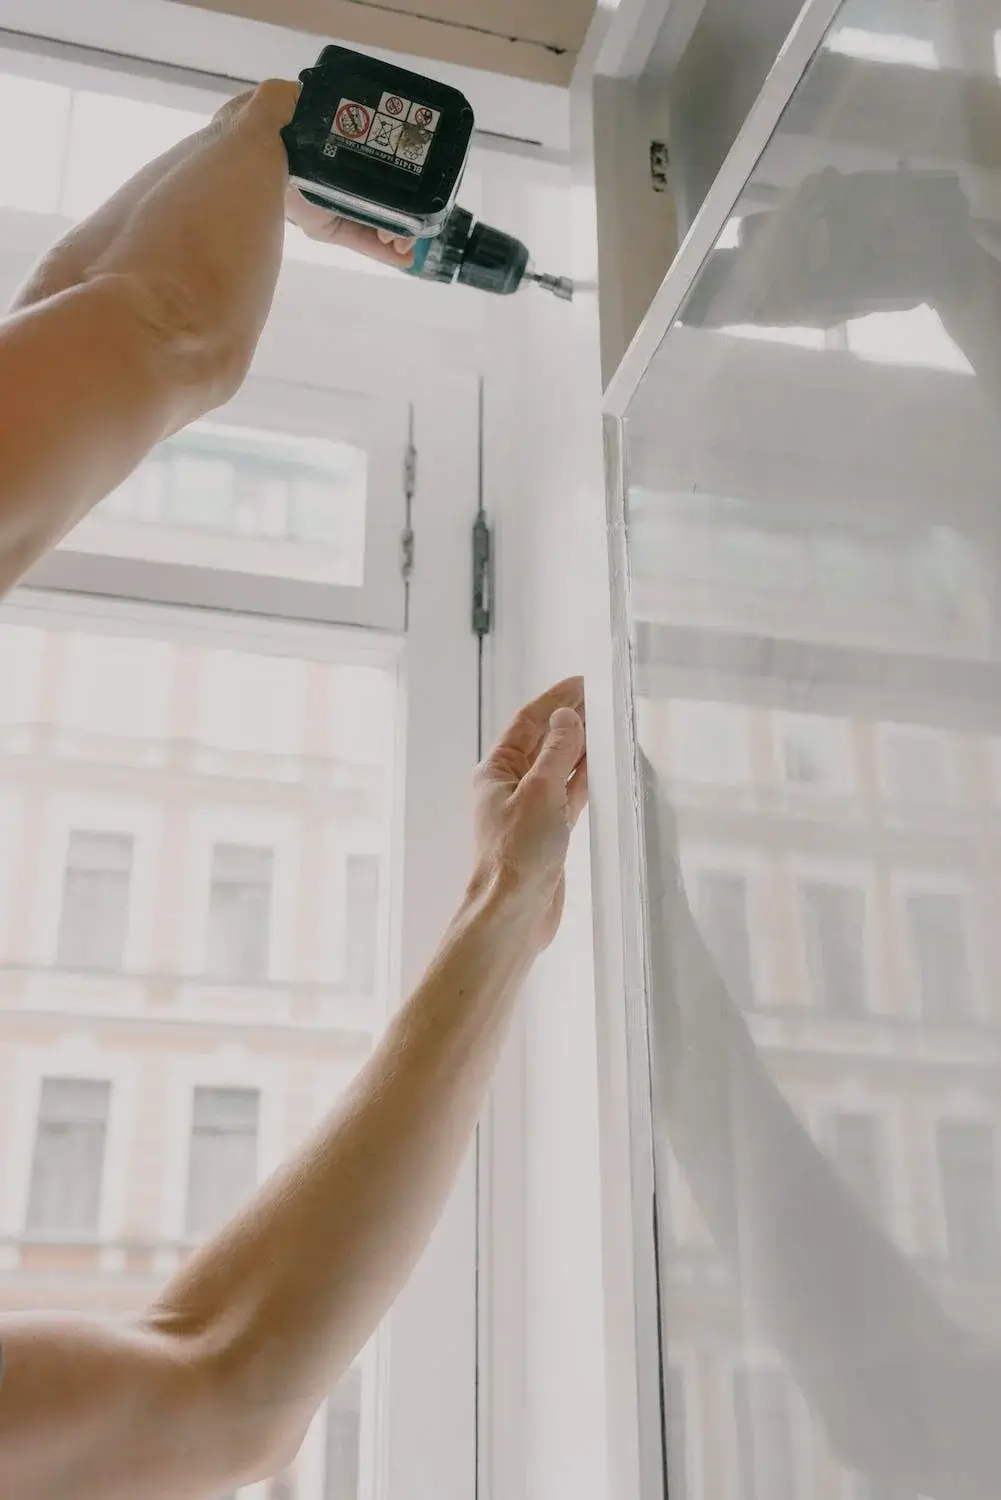 Two arms reach forward holding a drill to install a large window.